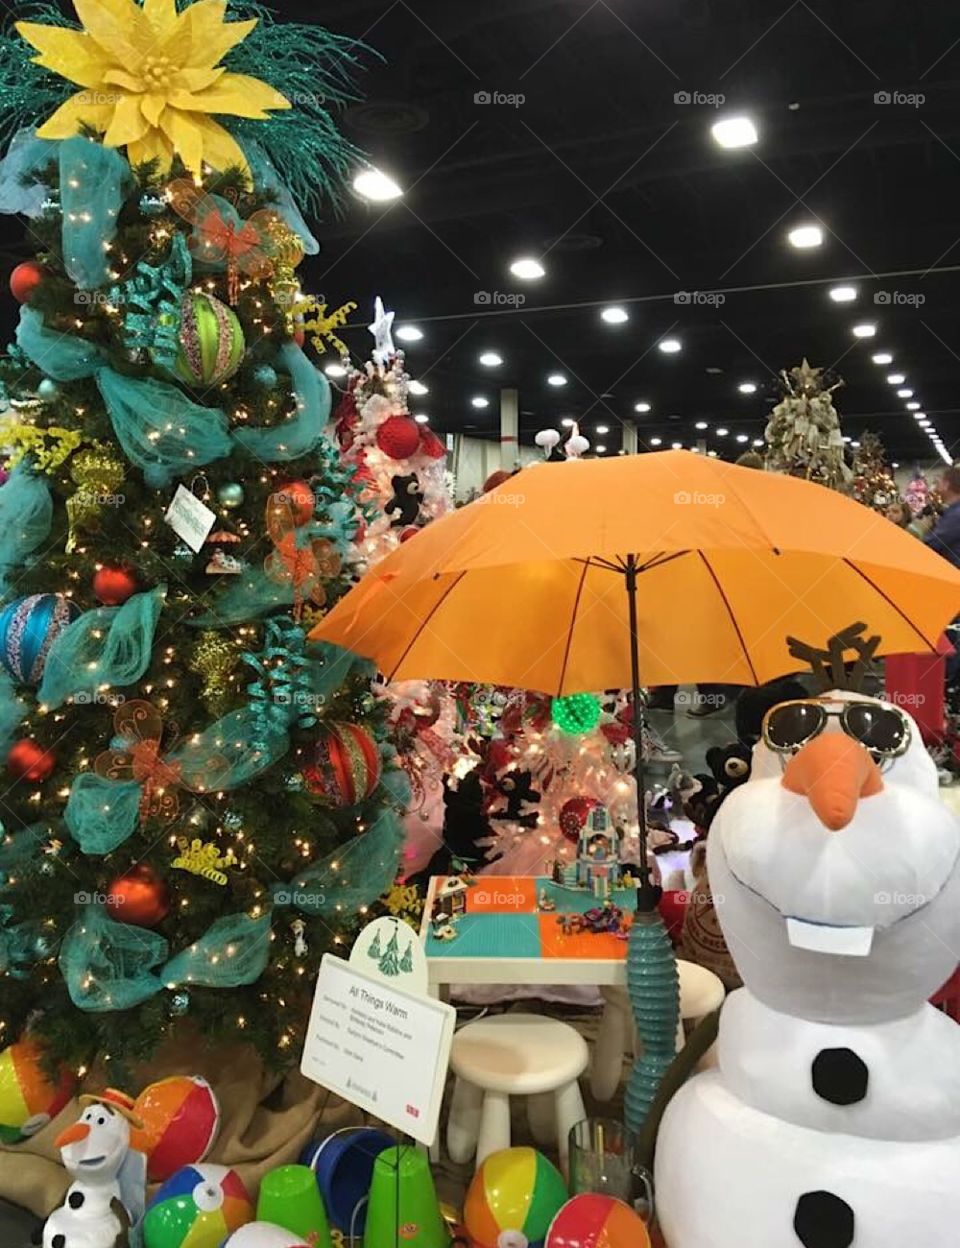 An Olaf Christmas at the Festival of Trees in SLC, Utah.